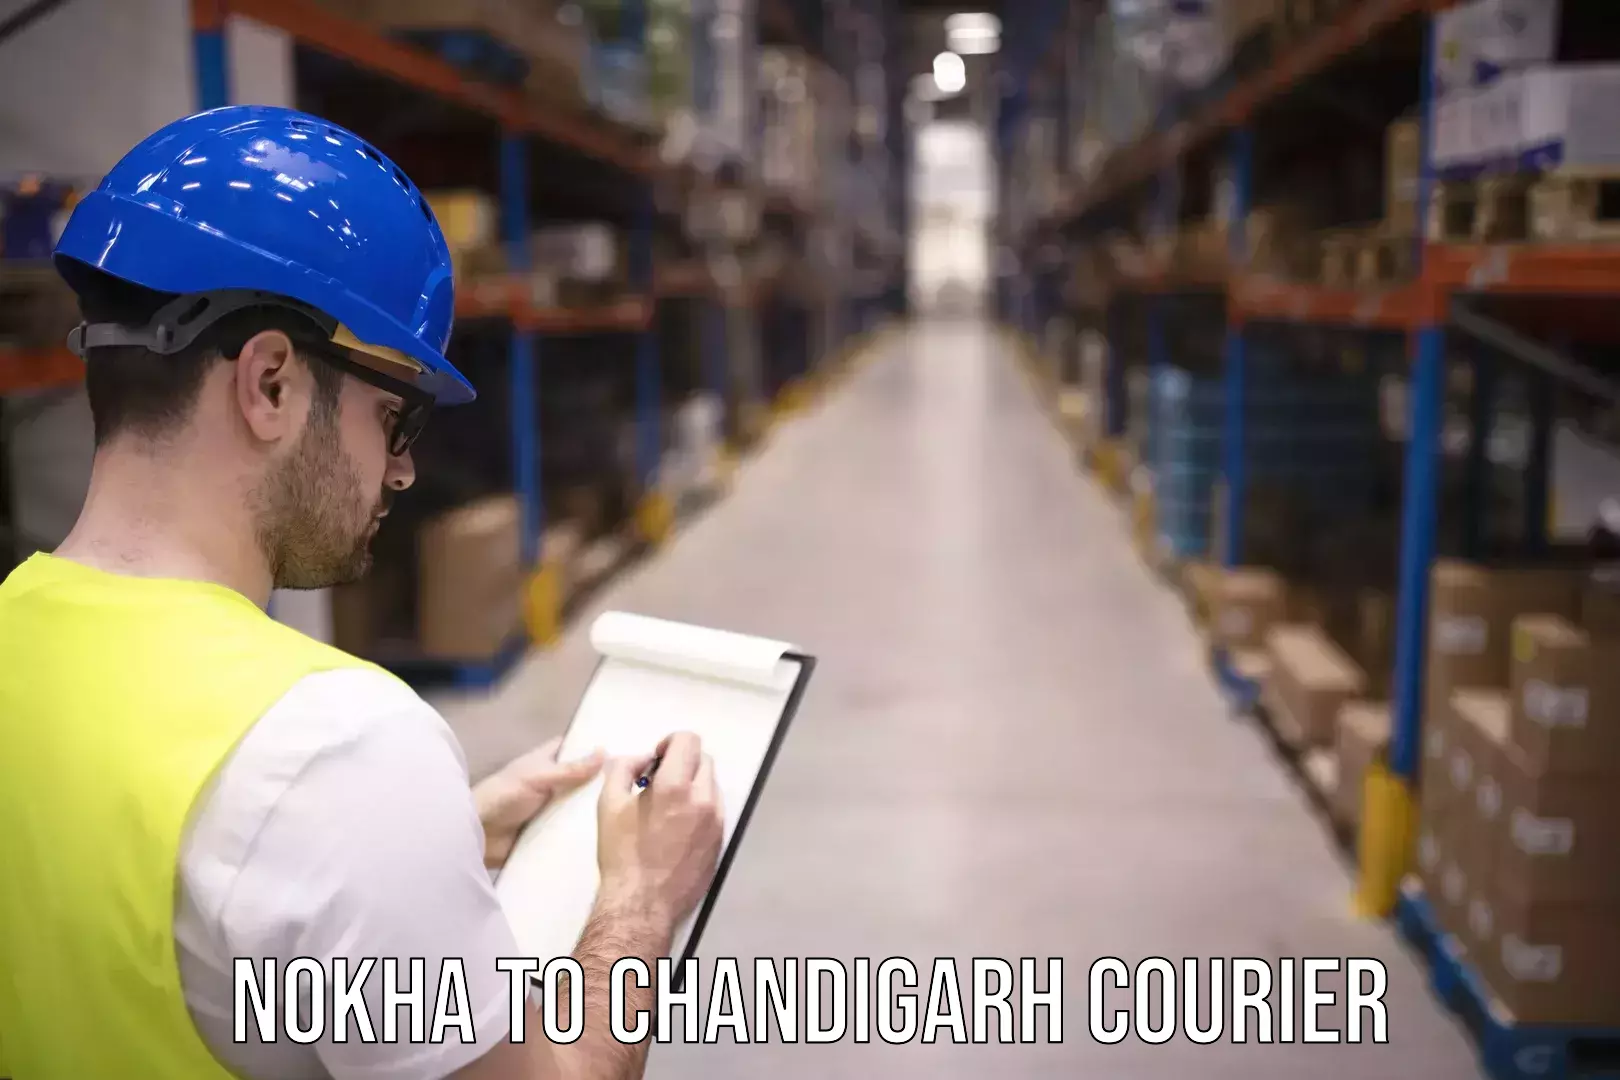 Courier service innovation Nokha to Chandigarh